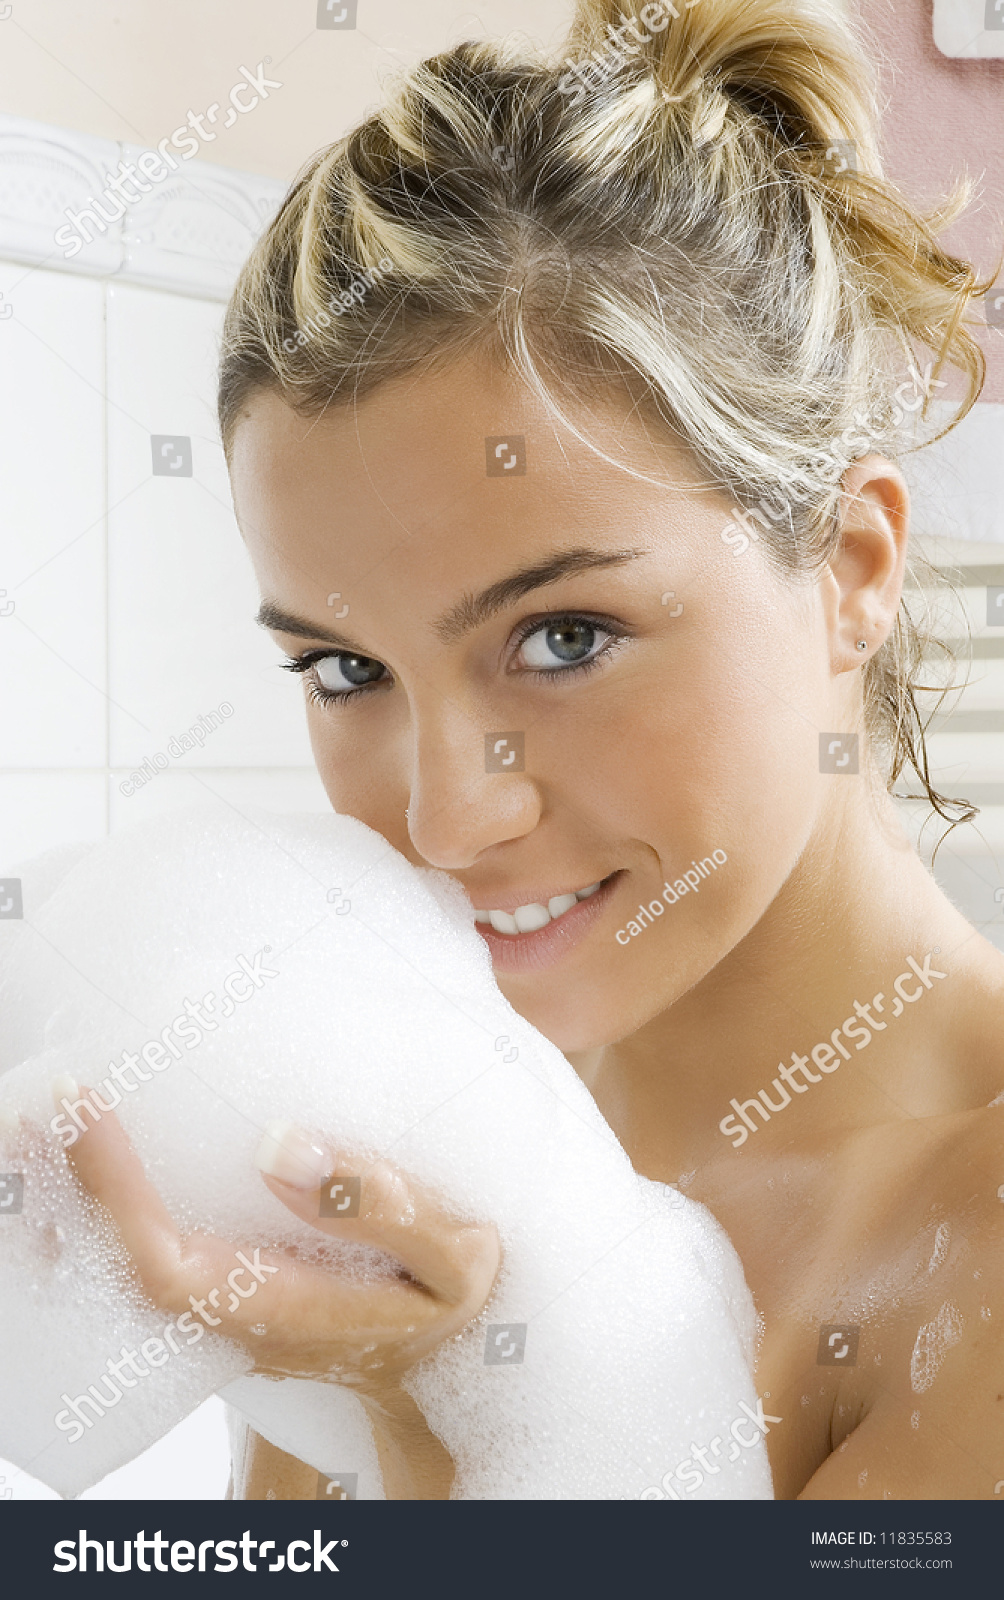 Portrait Of A Young And Cute Girl In Bathtub With Foam Near Her Face